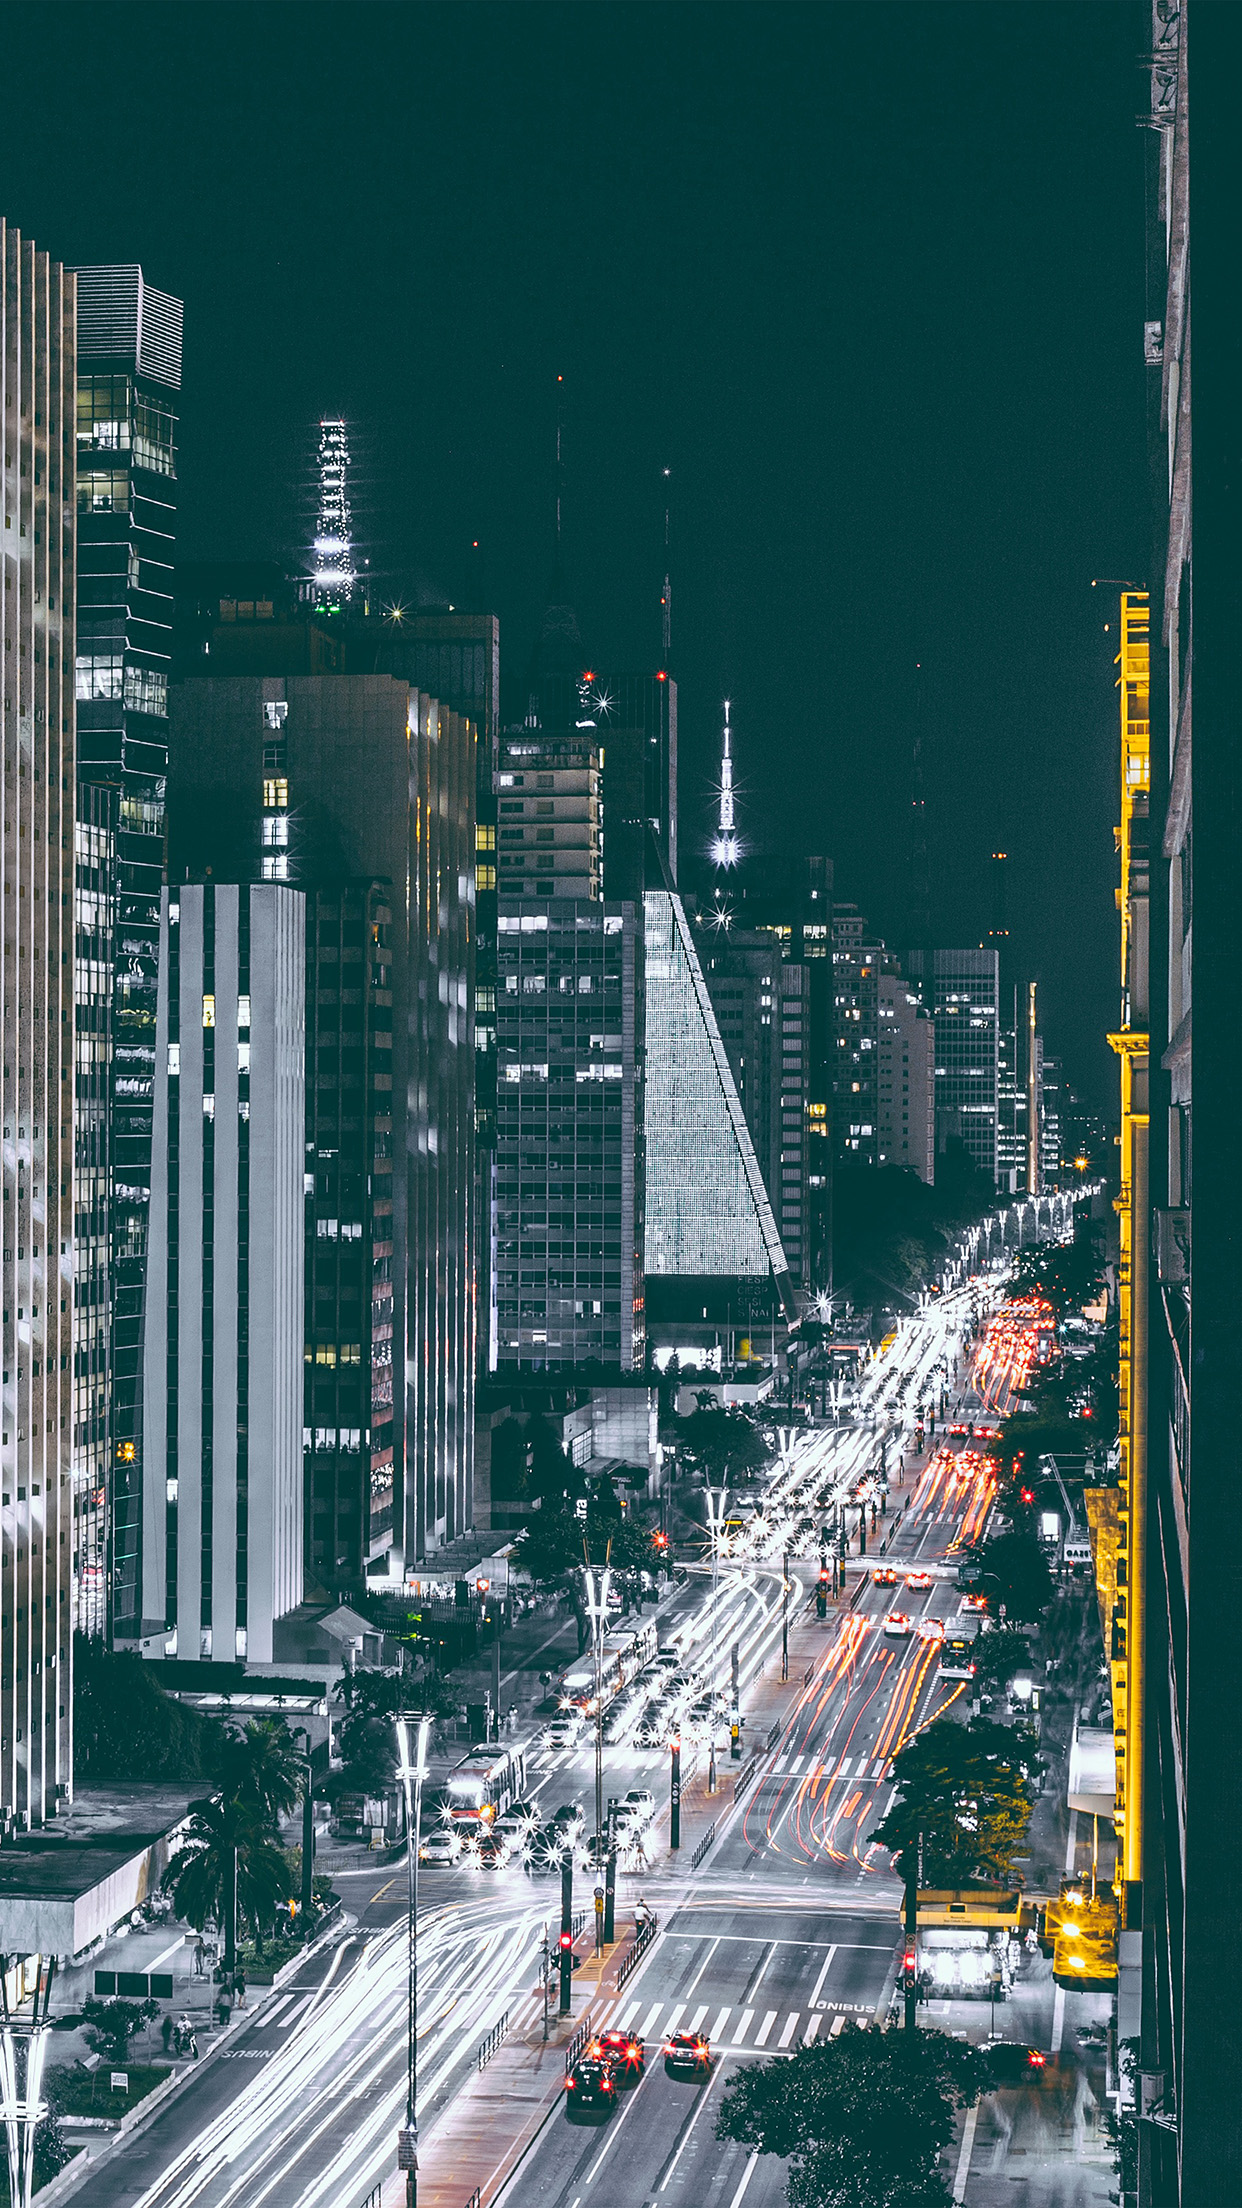 City Night View Urban Street Android wallpaper